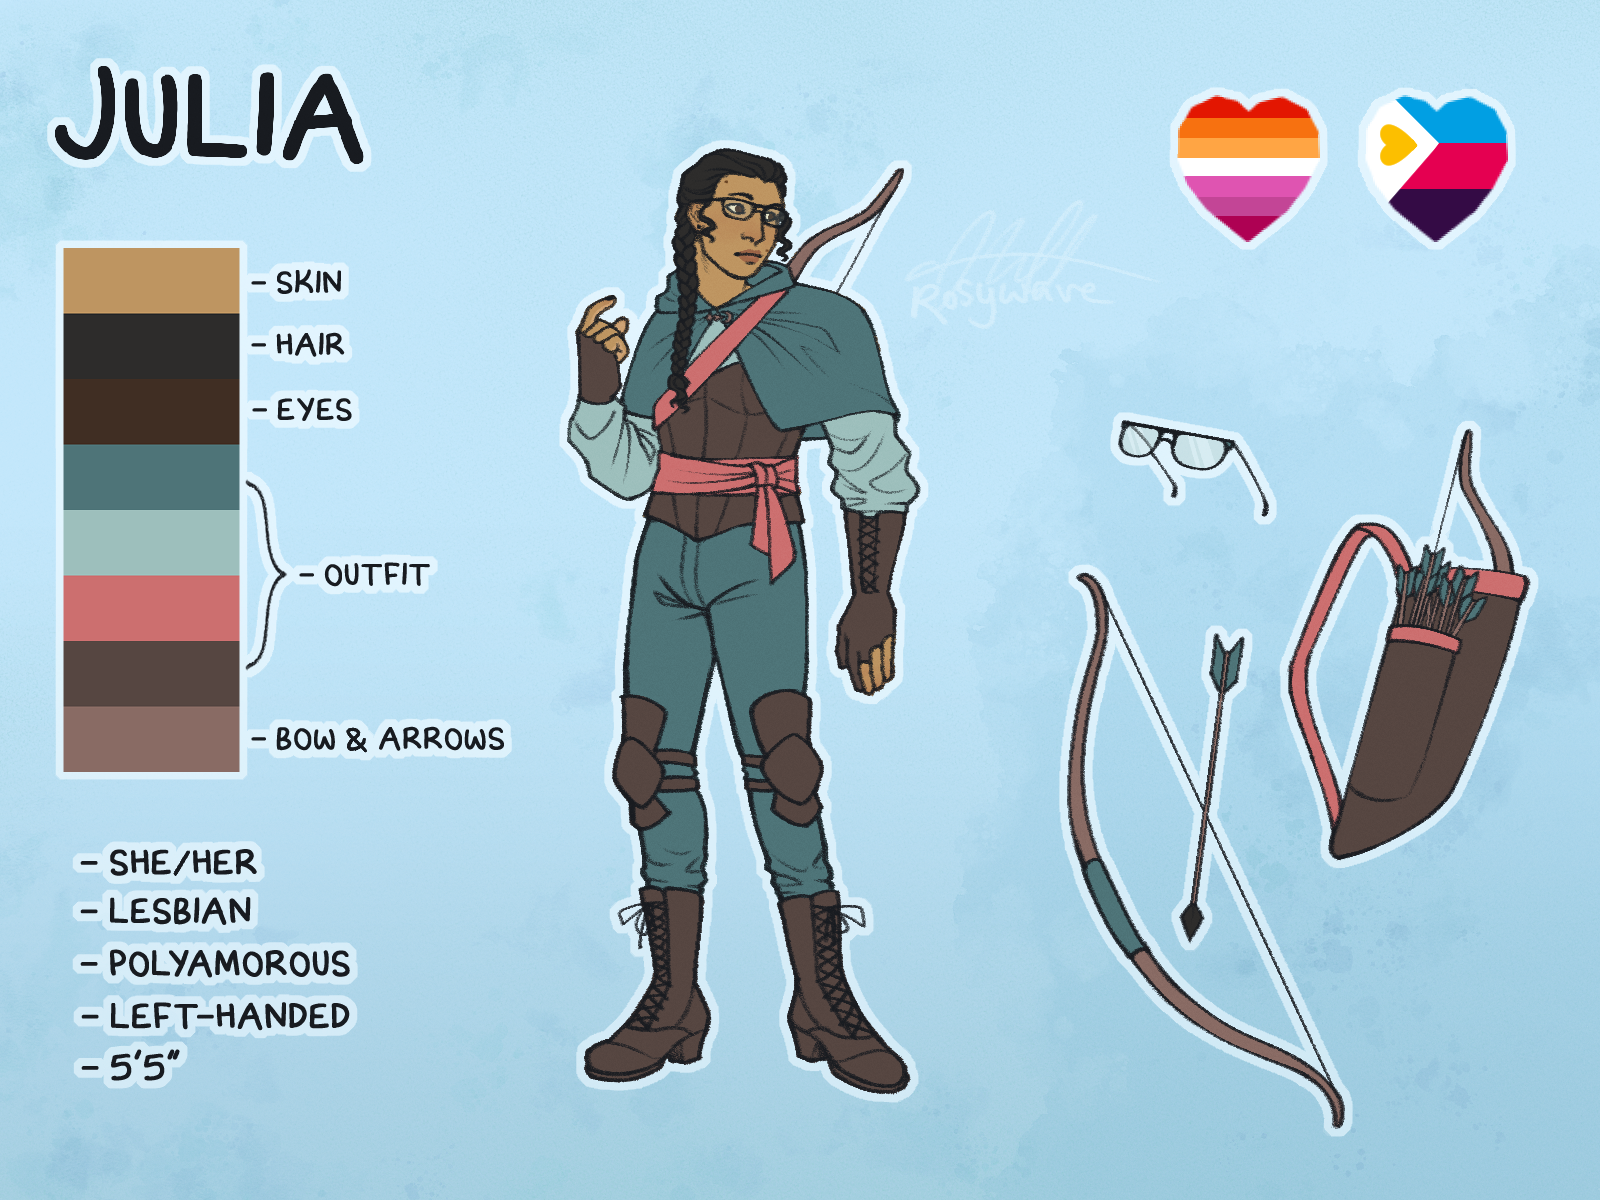 A reference sheet of a character named Julia. She has a dull turquoise outfit with brown and pink accents, long black hair in a braid thrown over her shoulder, aviator style glasses, and a quiver/bow case strapped to her back. There are additional references for her glasses, her bow case, and her bow.